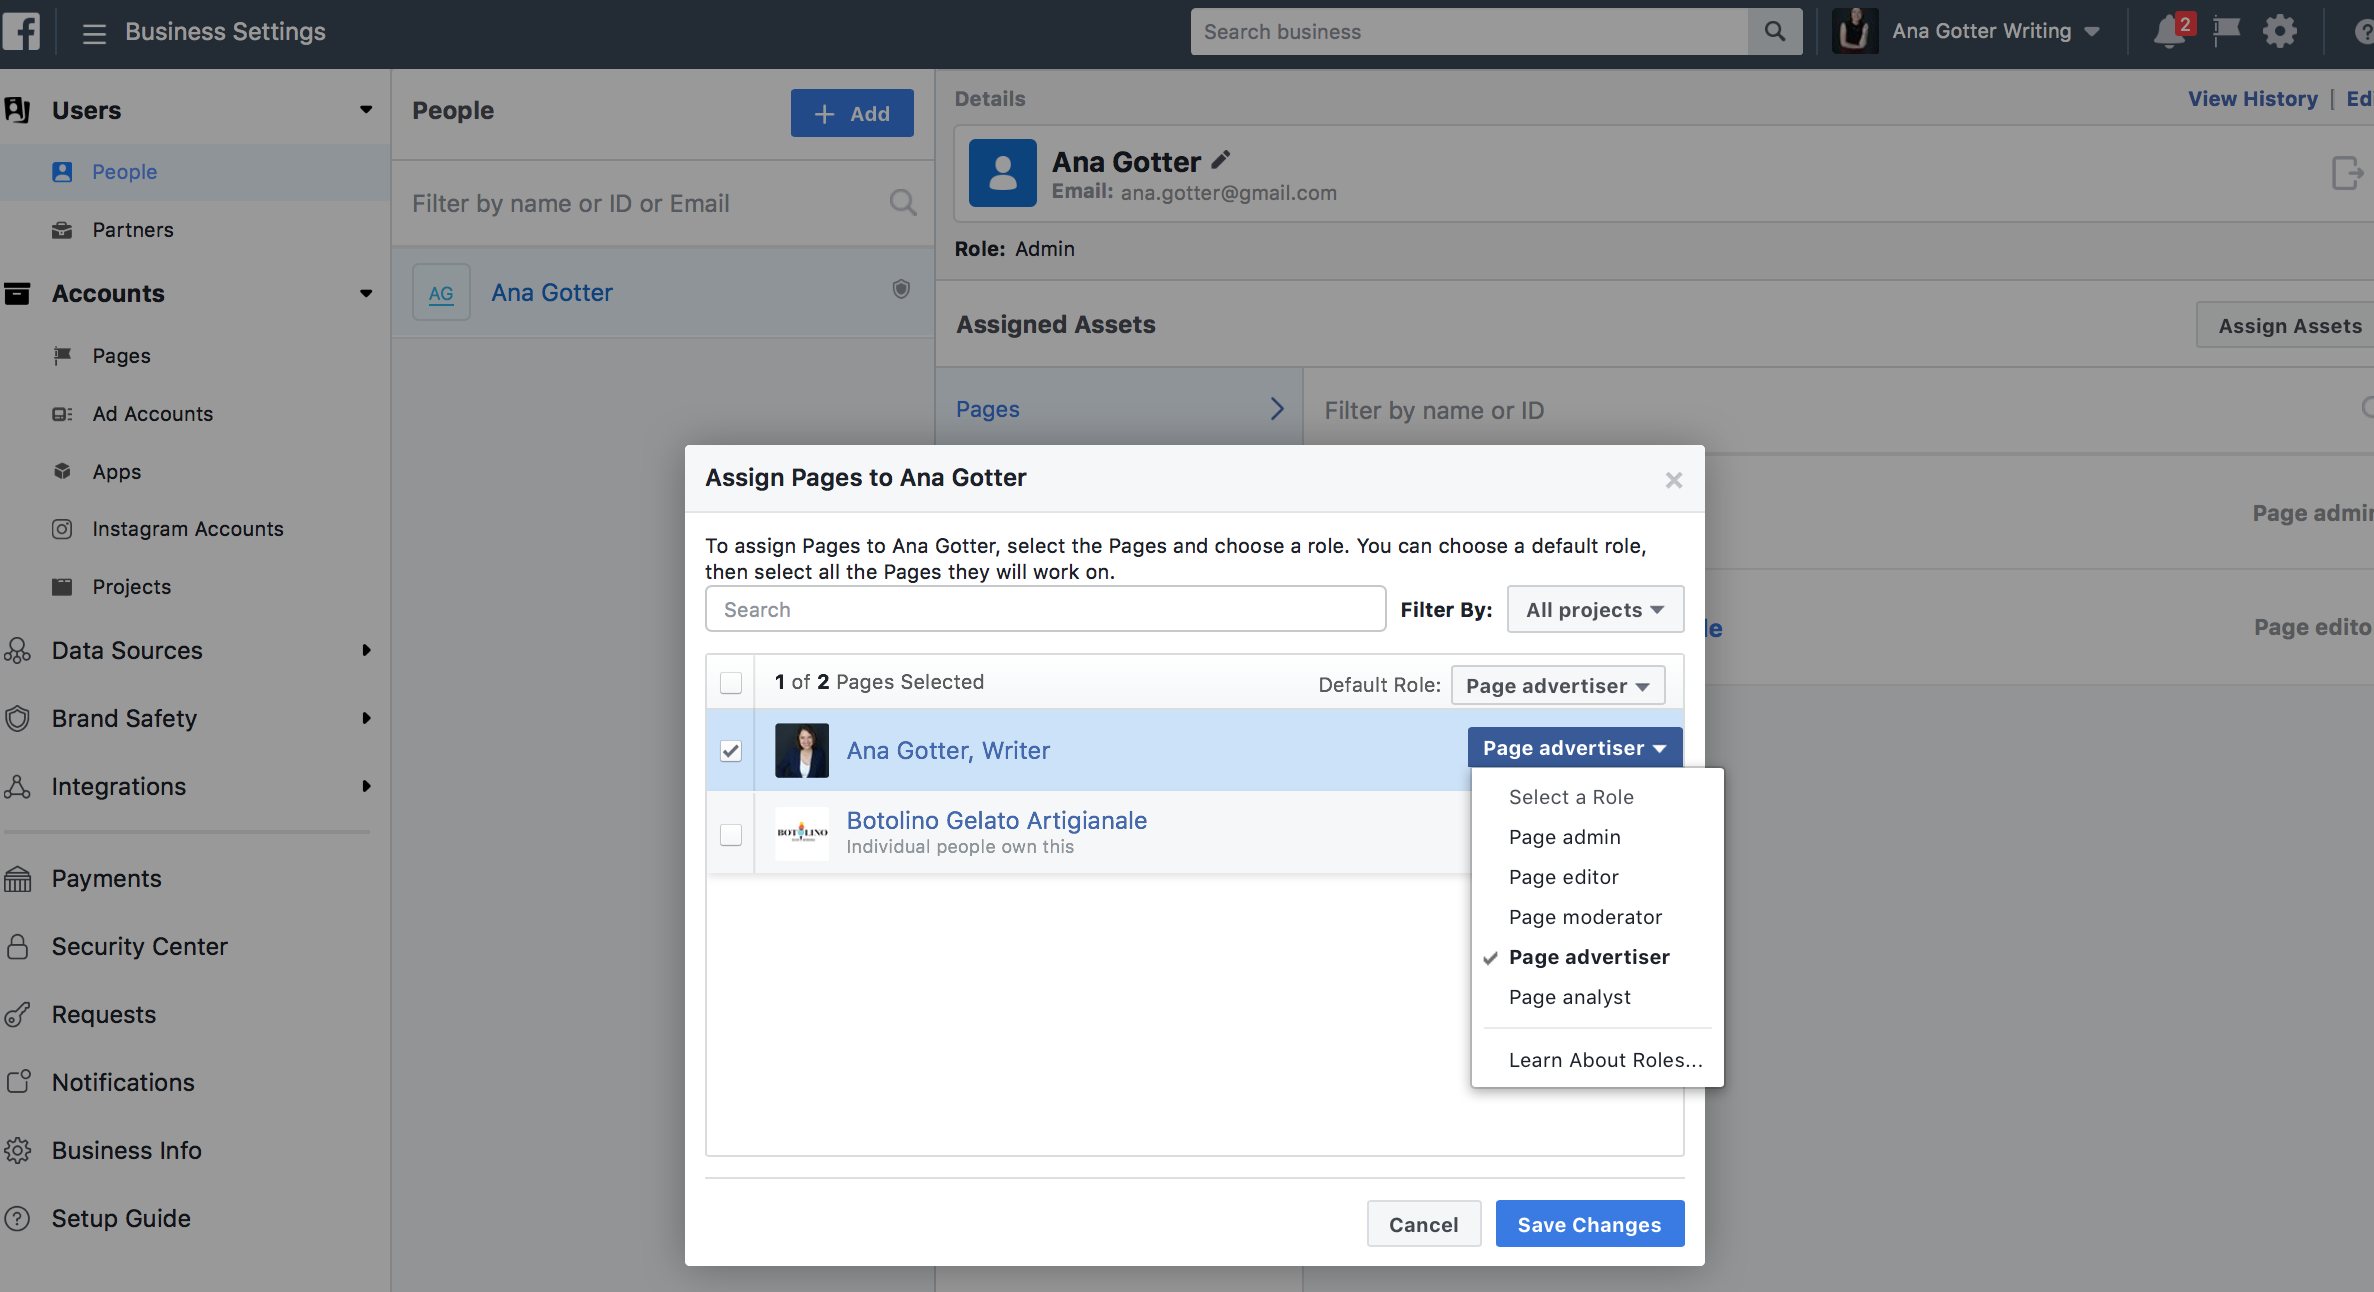 The Complete Guide to Facebook’s Business Manager